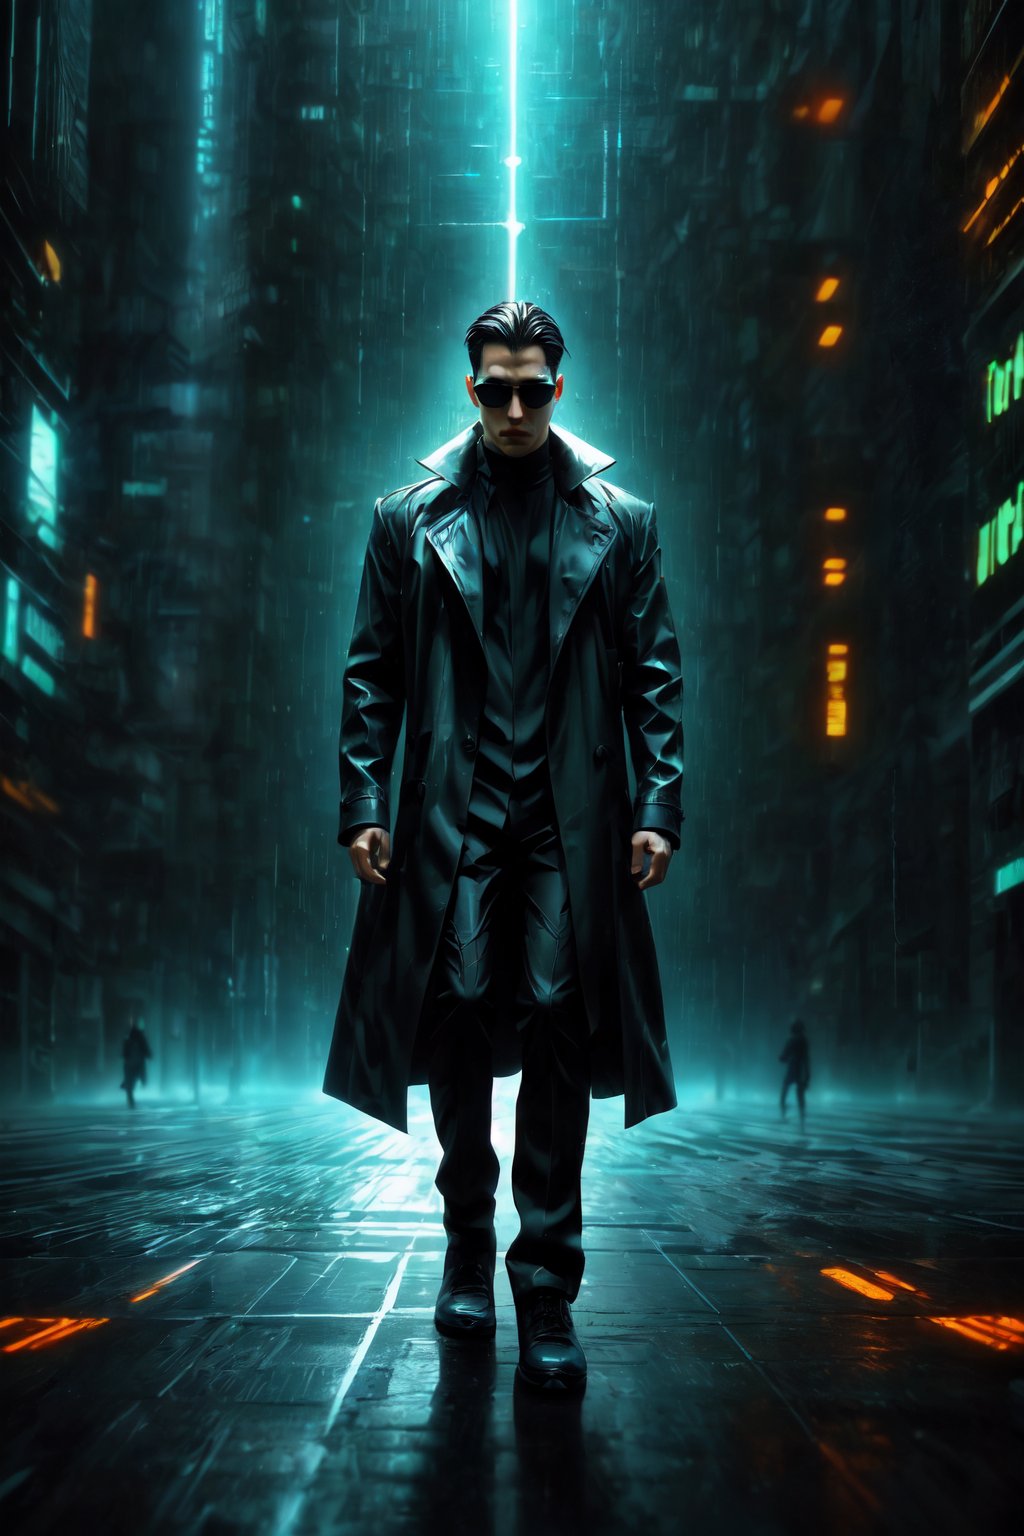 high-definition, dynamic, action-packed, 
1man, Matrix style, leaping, mid-air, all-black suit, black glasses, athletic build, intense expression, 
((depth of field)), urban skyline, futuristic cityscape, dark ambiance, digital code rain, neon lights, gorgeous movements, Code matrix cascading from top to bottom, by FuturEvoLab, 
gravity-defying, cyberpunk atmosphere, surreal, digital world, ,Human bones,Time Travel Style,Holy light